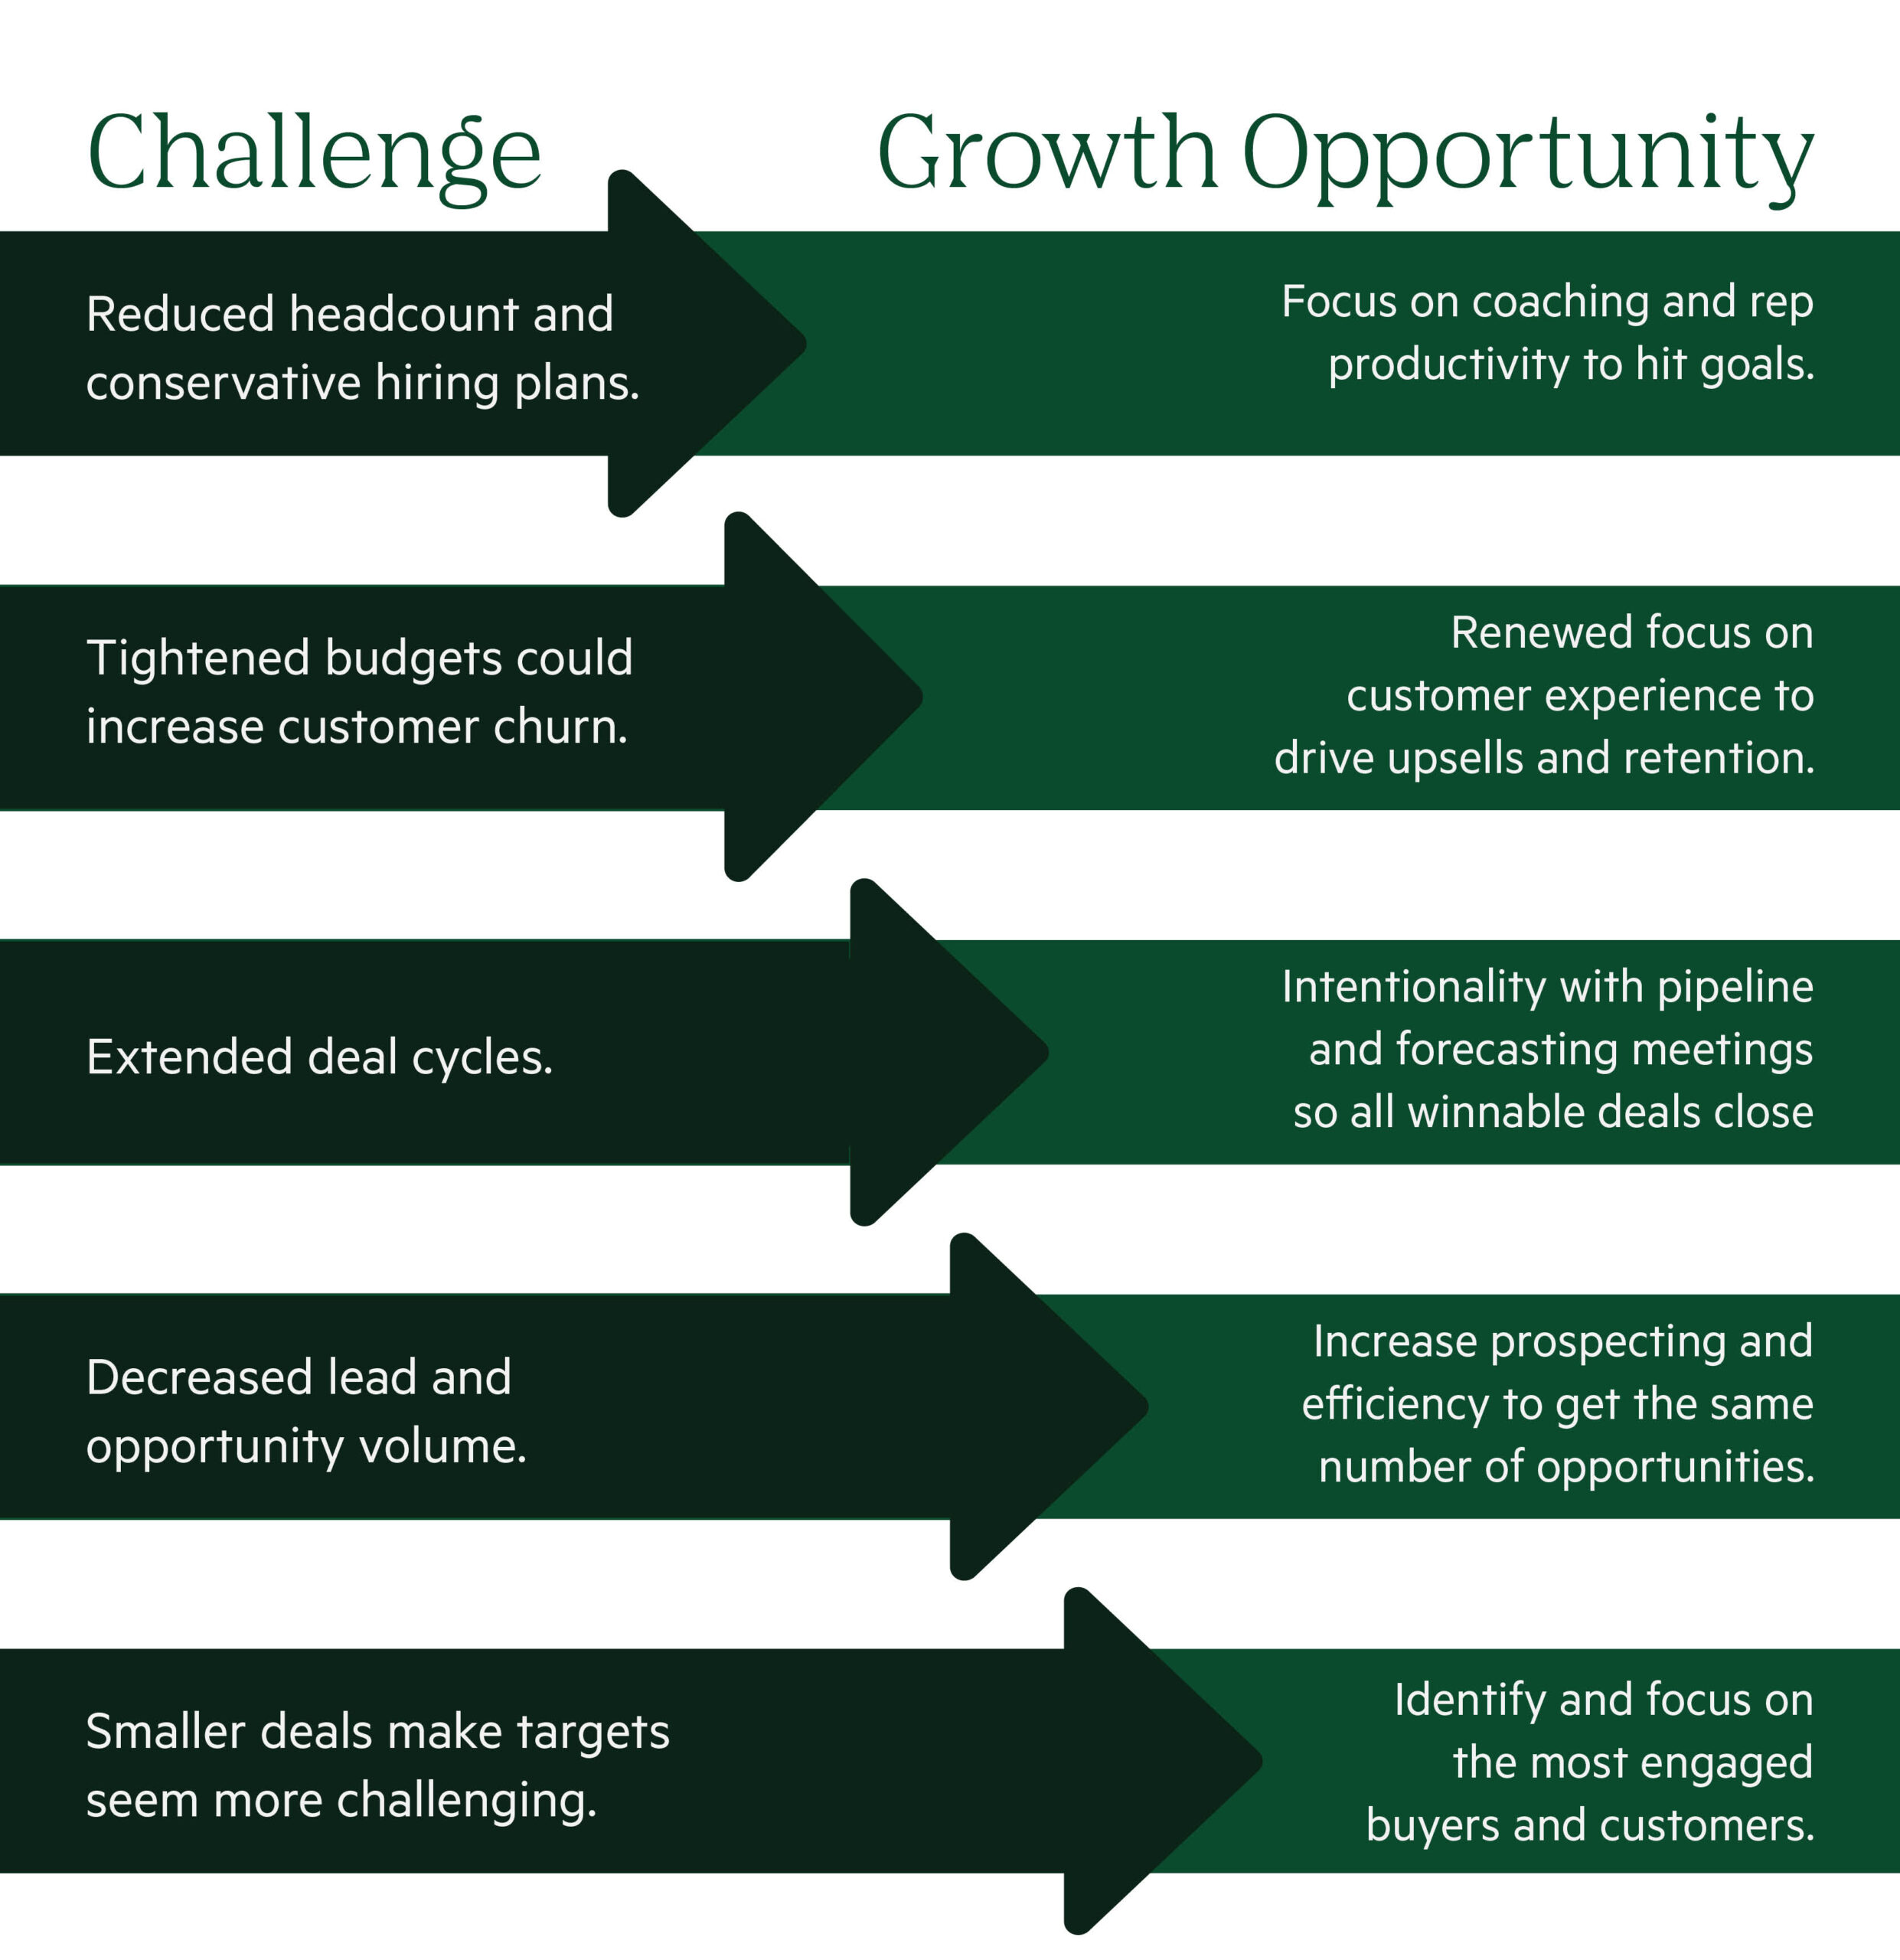 Turning challenges into growth opportunities